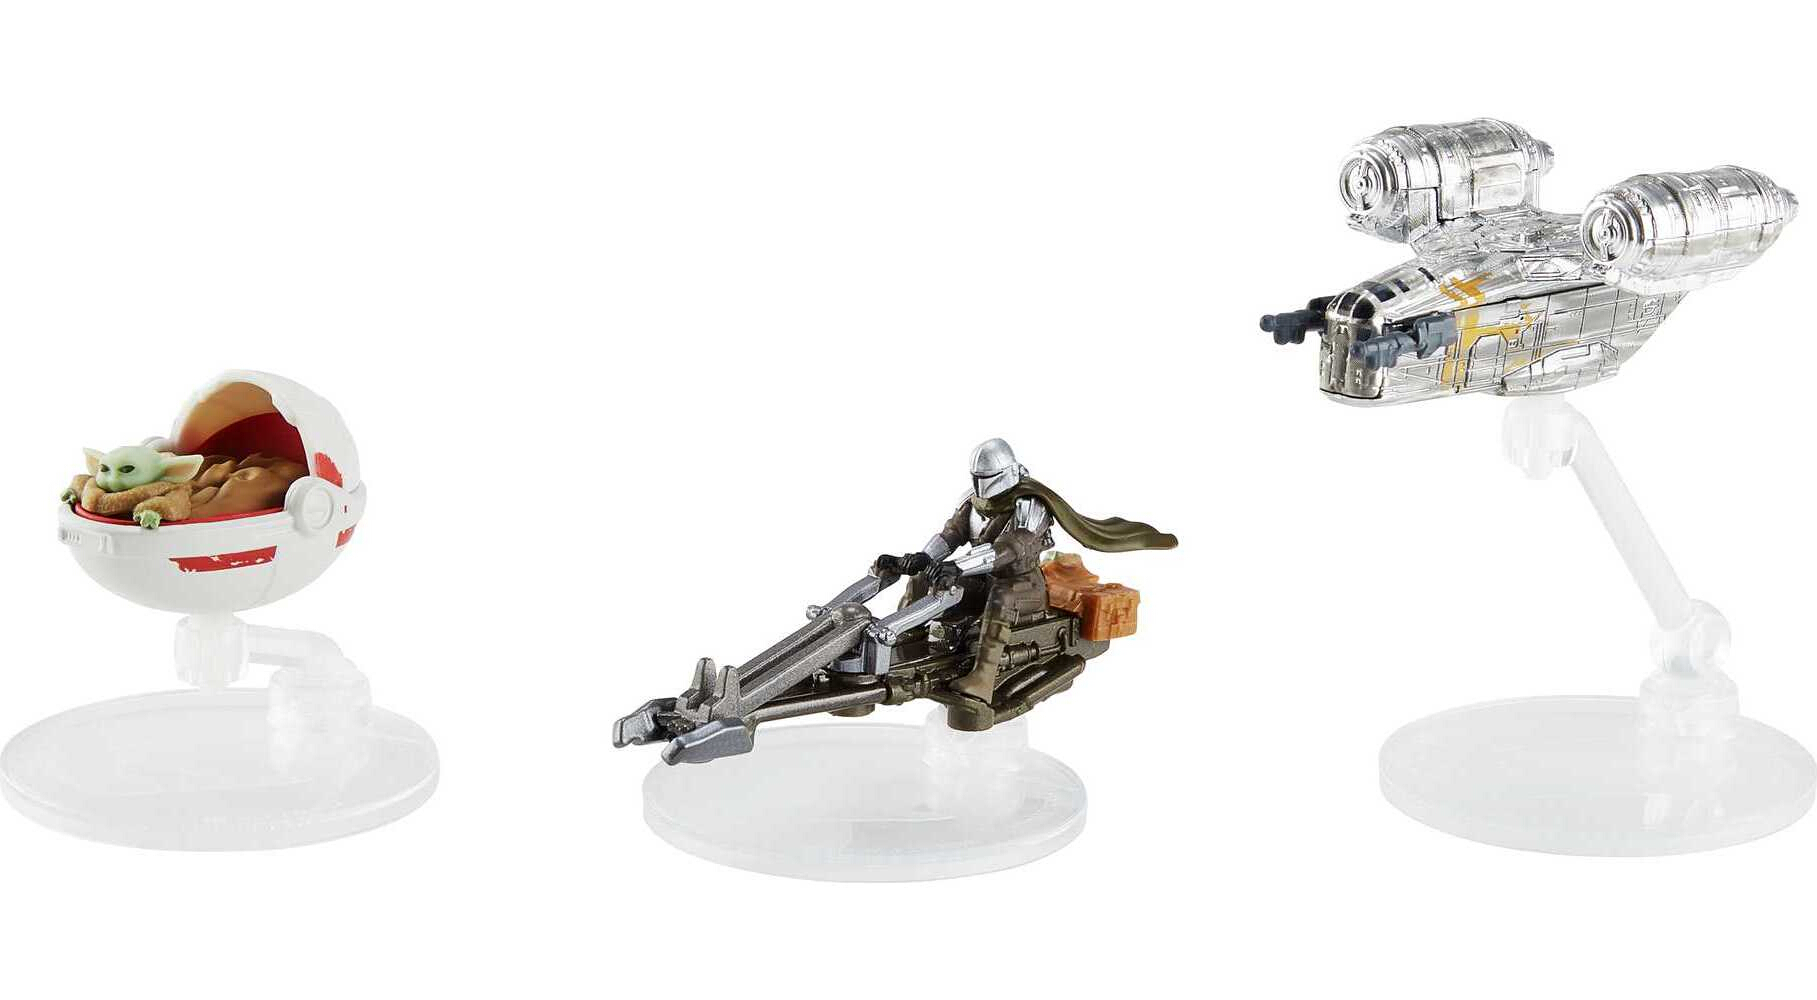 Hot Wheels Star Wars Starships 3-Pack Inspired by The Mandalorian, Set of 3 Die-Cast Ships - image 2 of 4